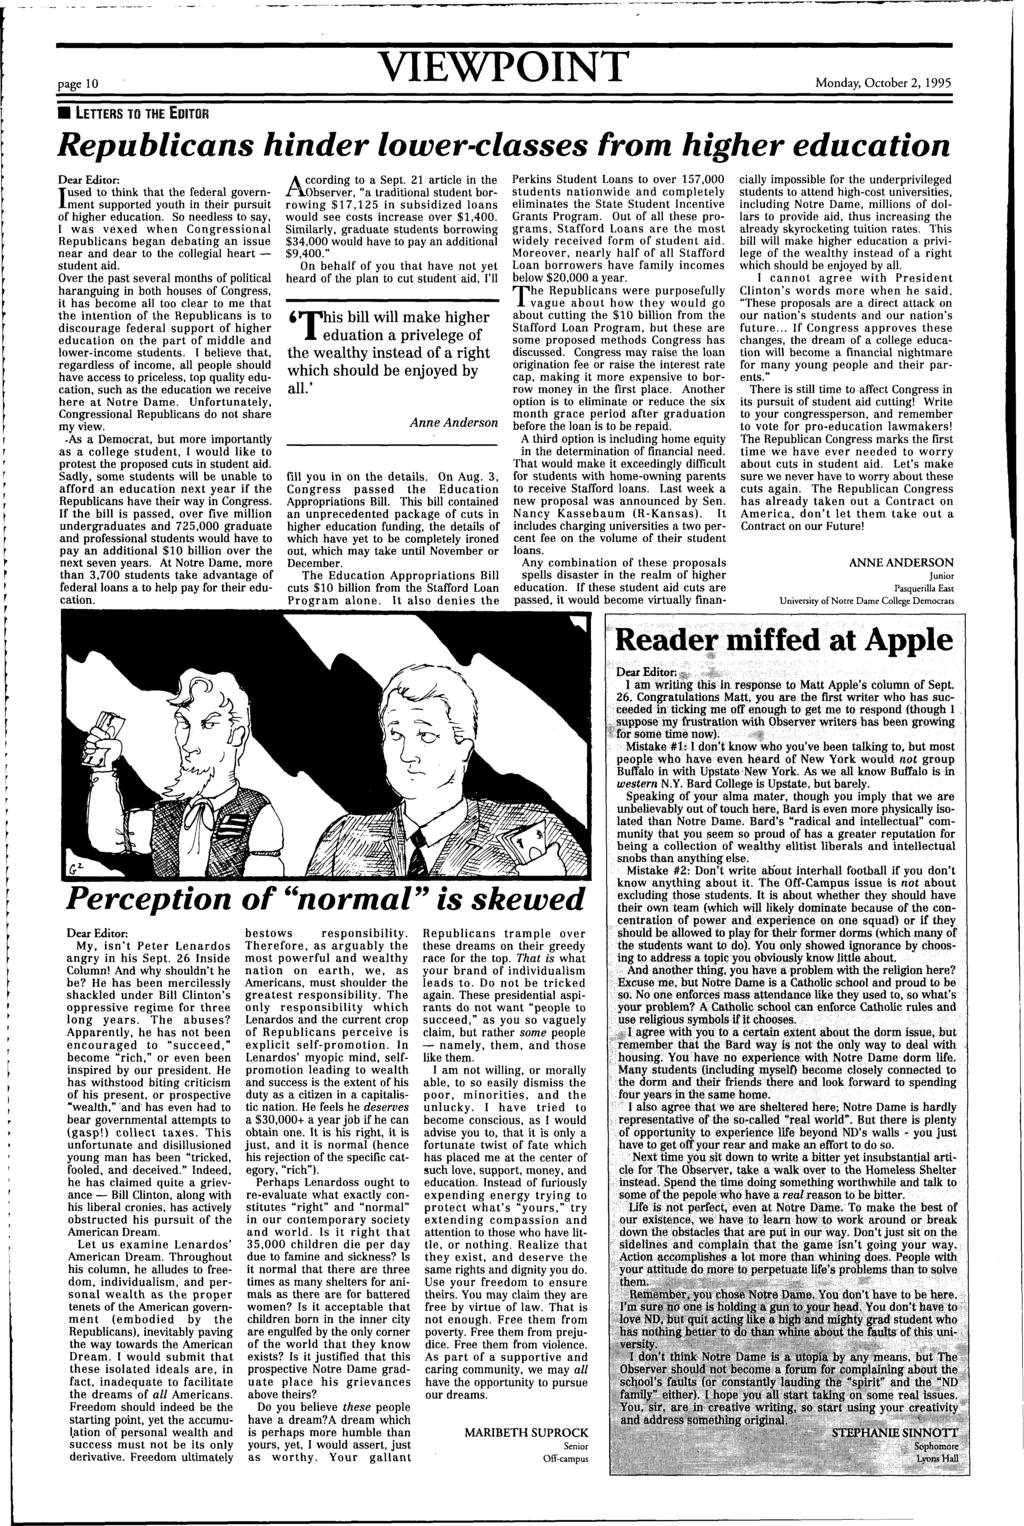 page 10 VIEWPOINT Monday, Octobe 2, 1995, ~ ~ ~ ' LETTERS TO THE EDITOR Republicans hinde lowe-classes fom highe education Dea Edito: used to think that the fedeal govenment suppoted youth in thei